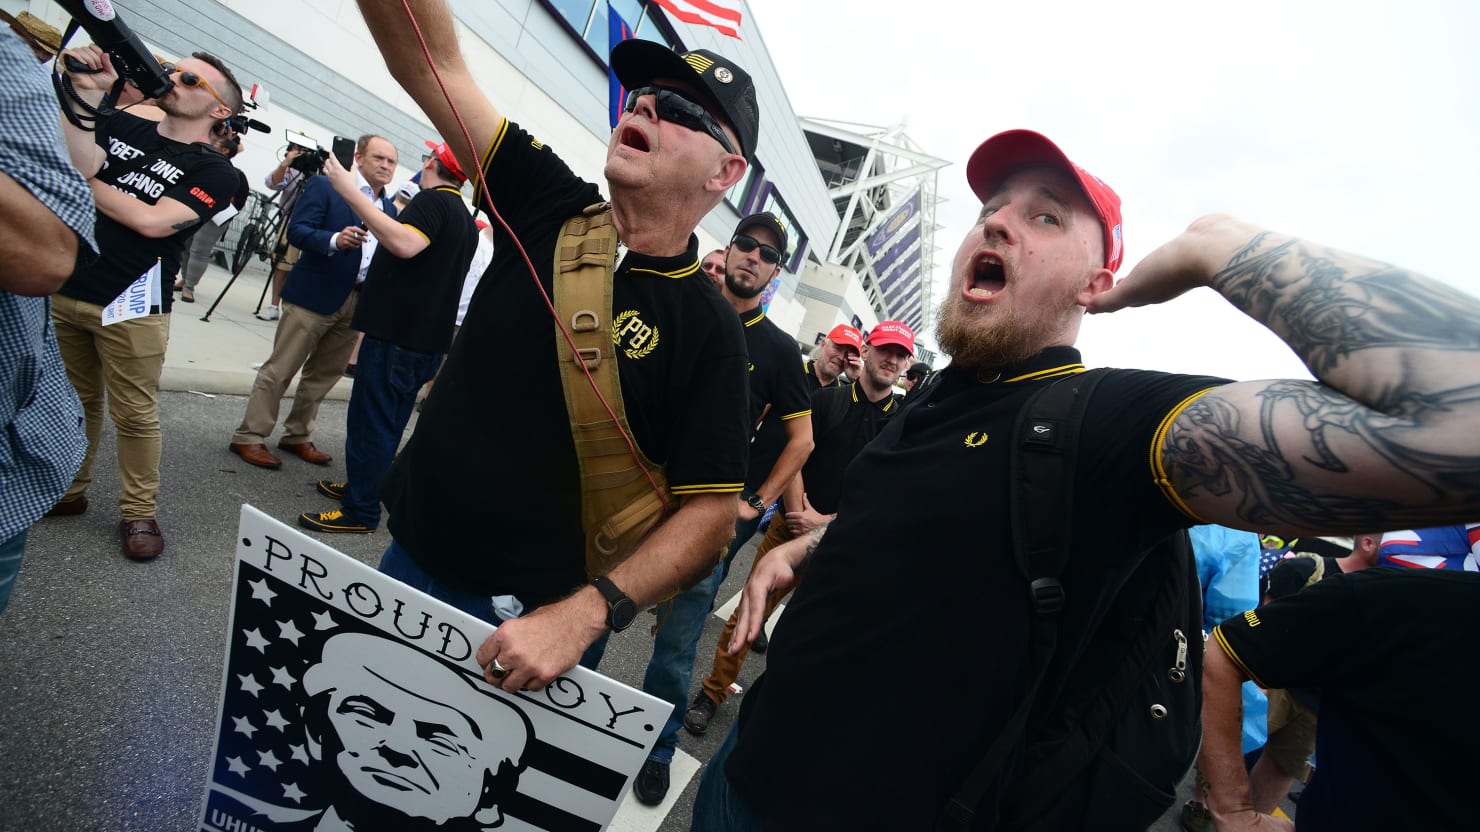 Proud Boys to Beef Up Presence at Trump 2020 Events